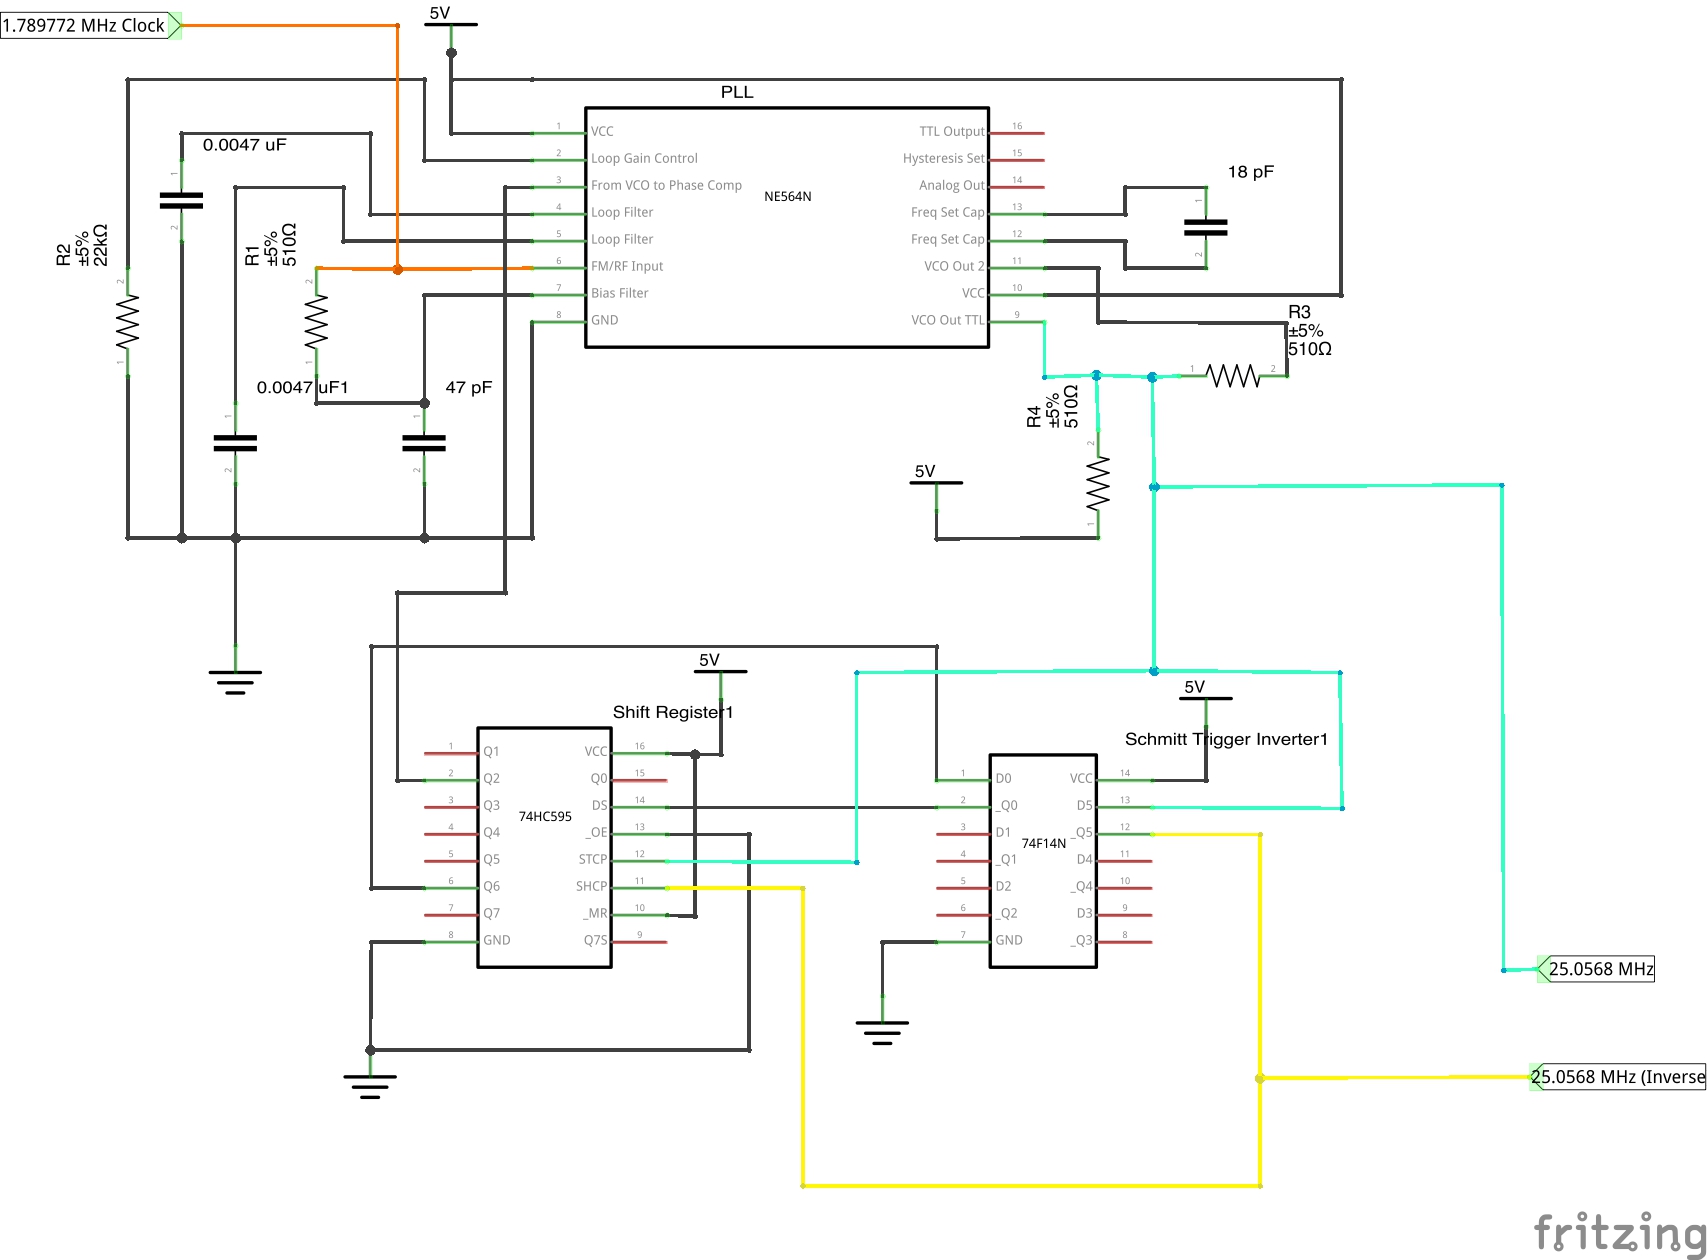 NE564N schematic to multiple a clock with a PLL